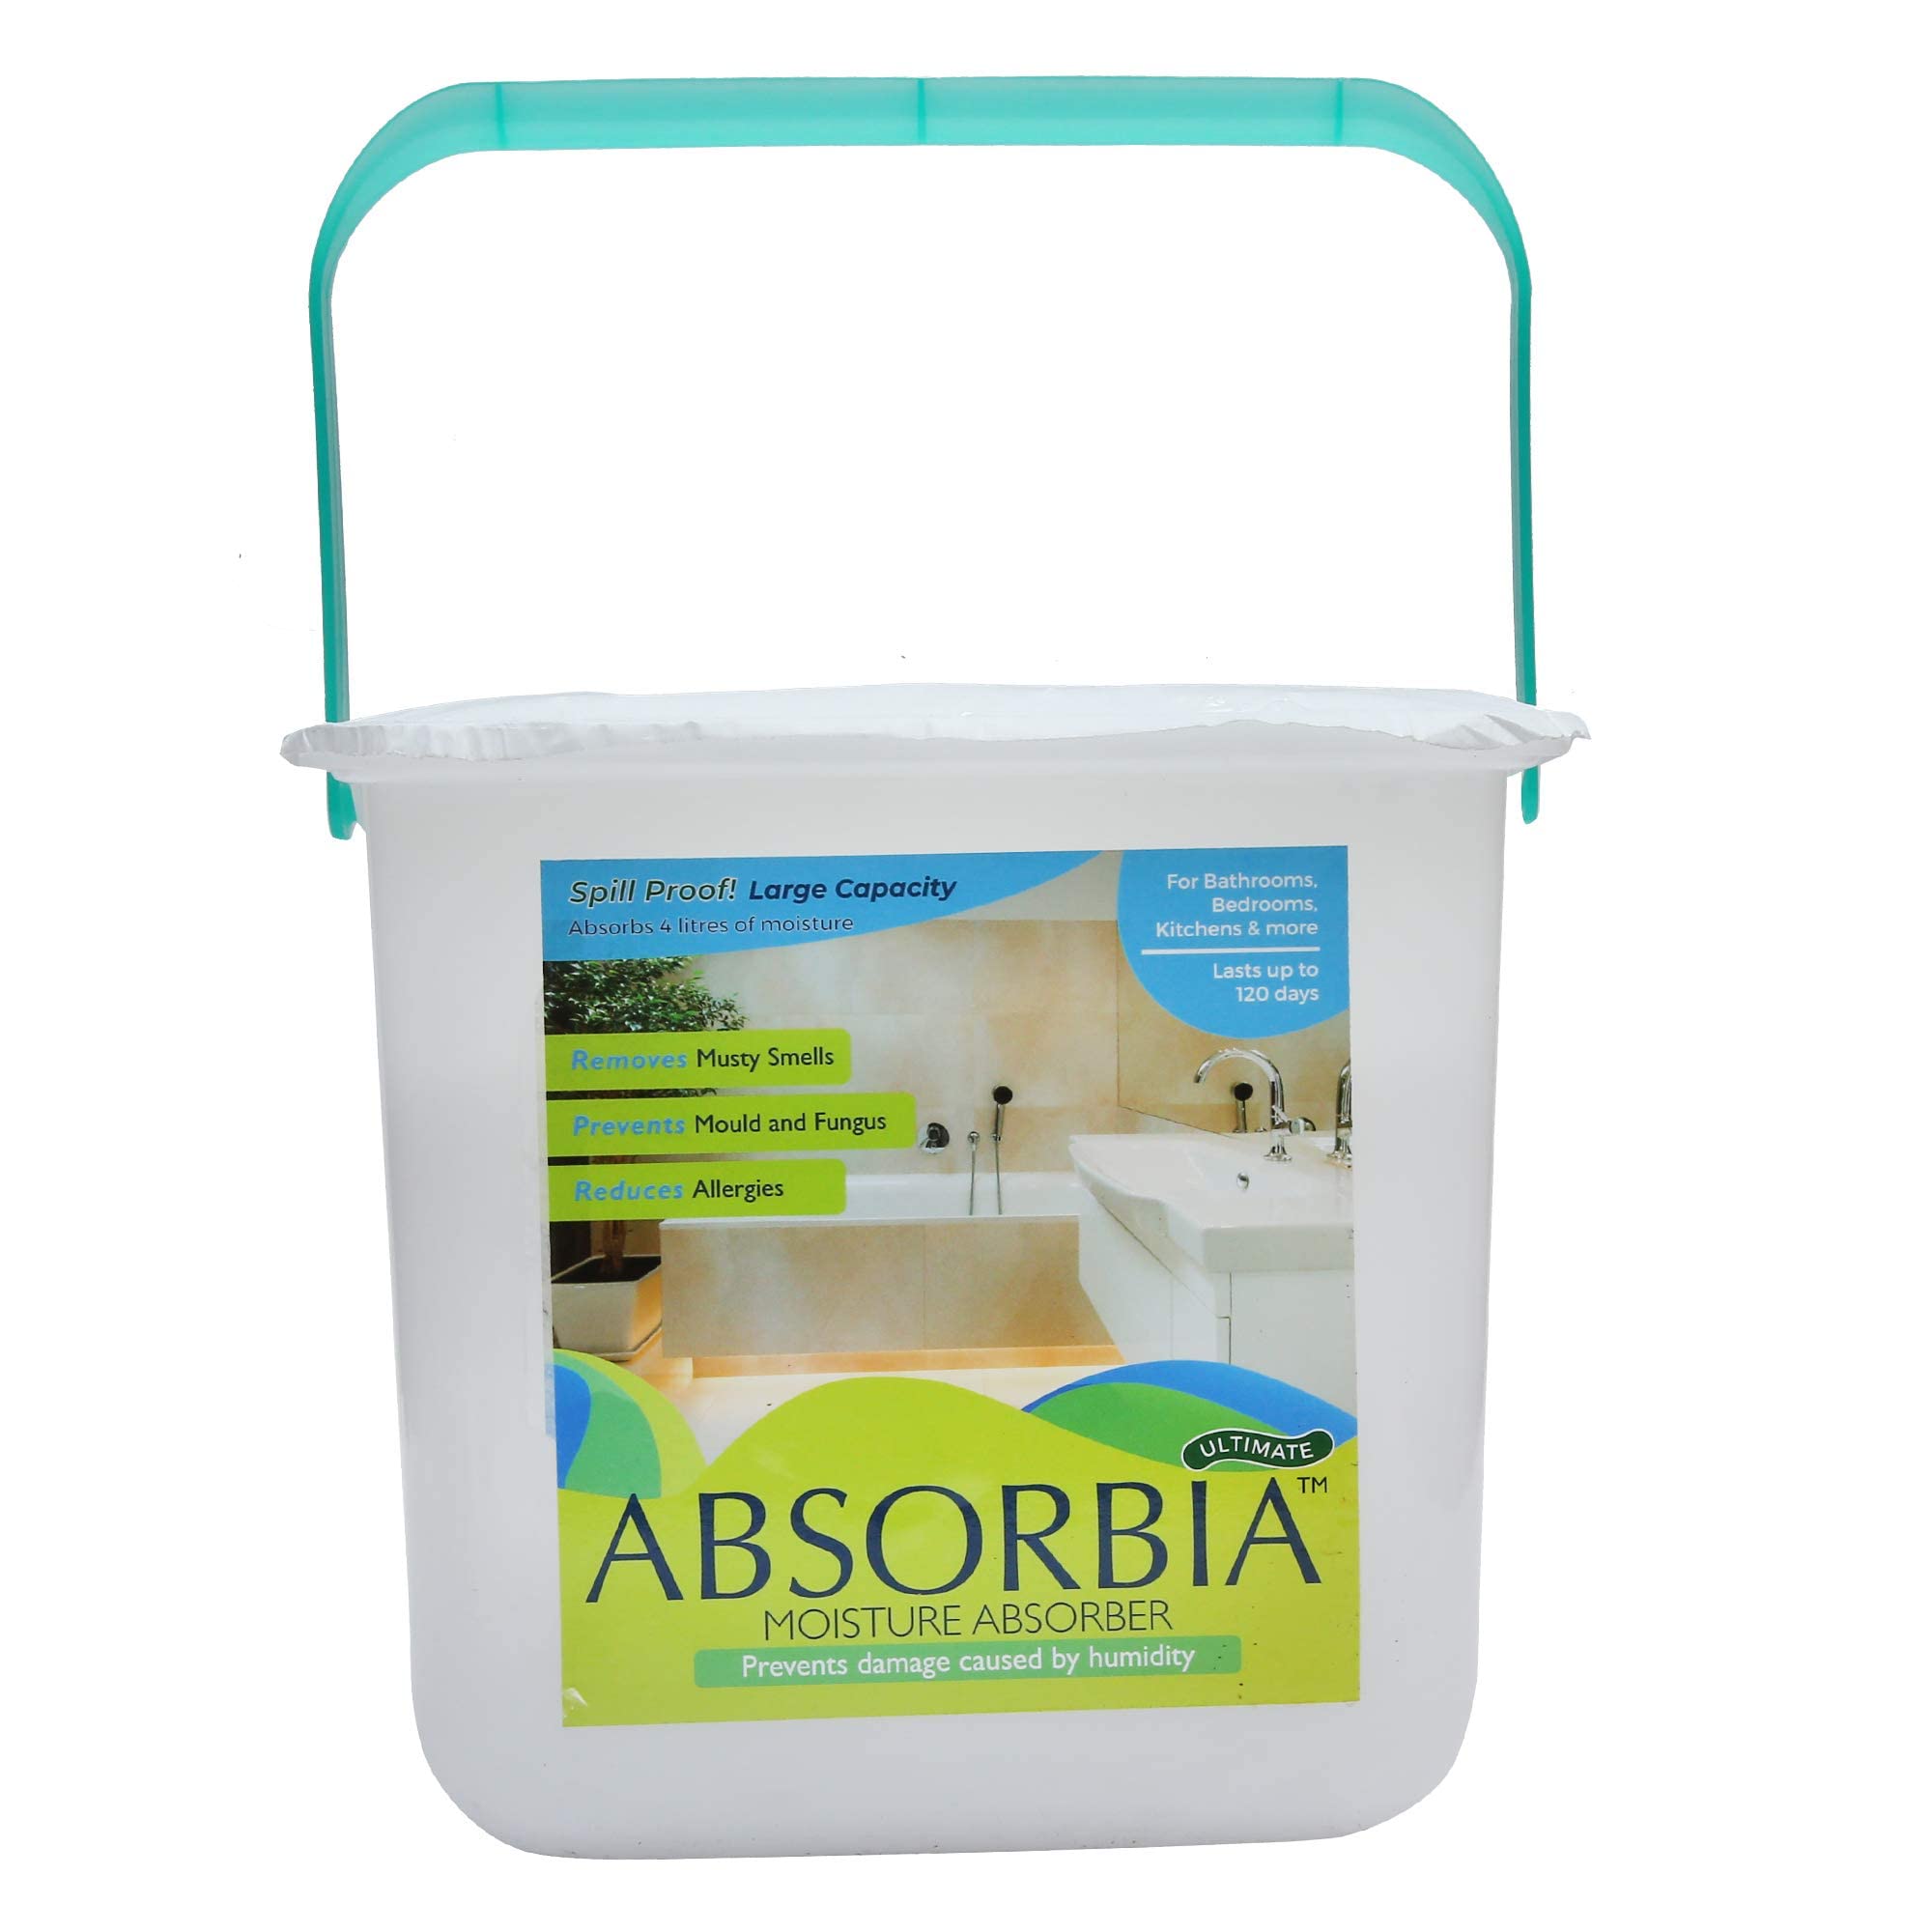 Absorbia Moisture Absorber | Absorbia Ultimate (4L) | Pack of 12 Non-Electric Dehumidier for Large Areas, Bedrooms, Living Room Dining Room| Fights Against Moisture, Mould, Fungus Musty smells…